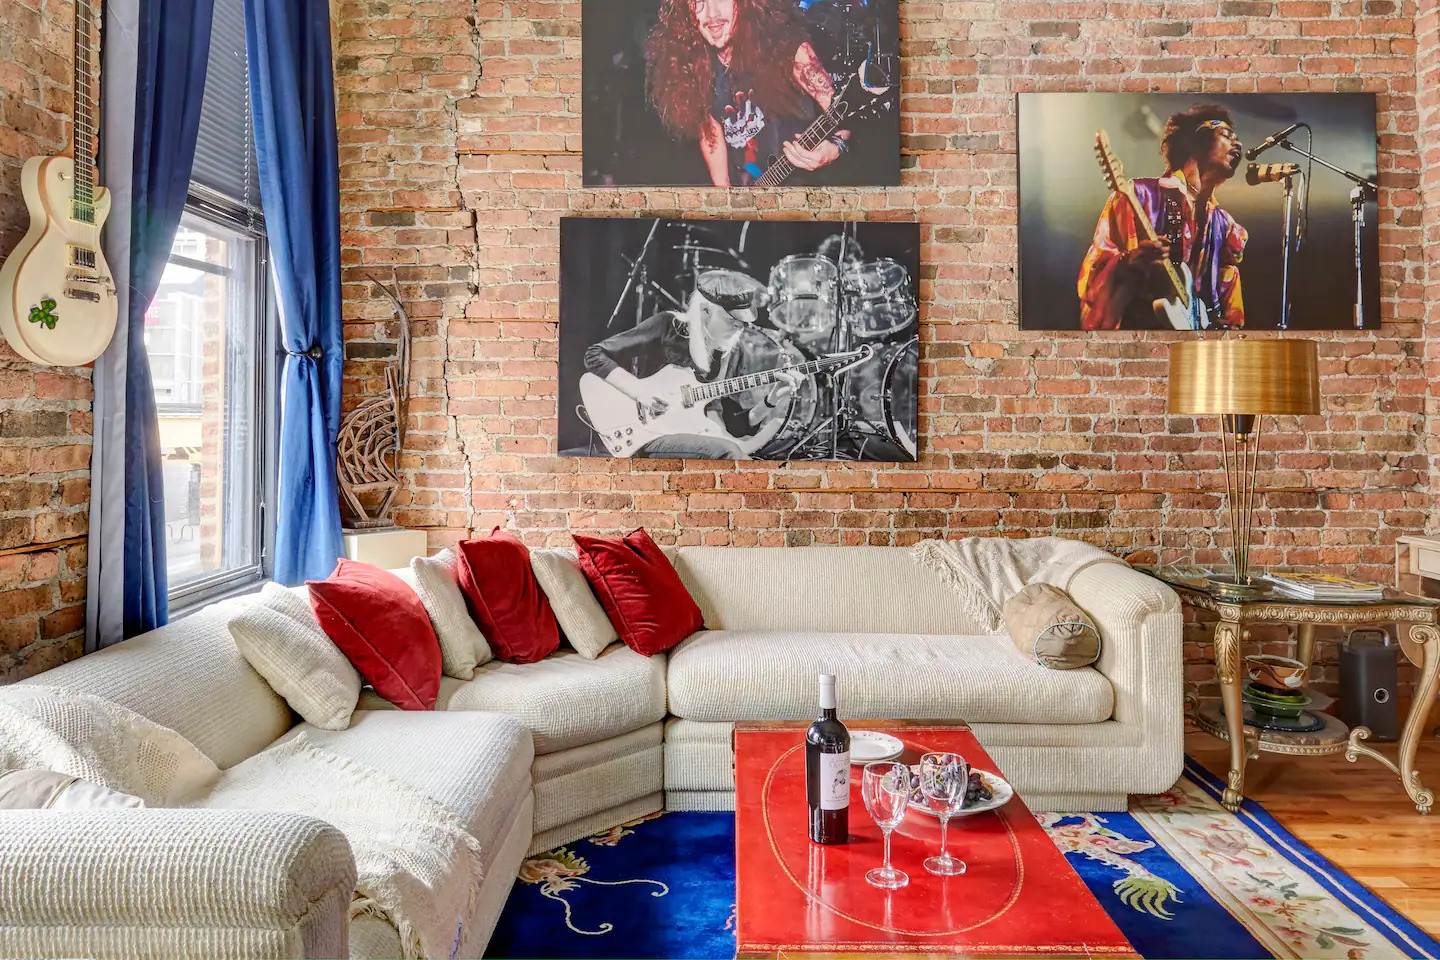 music airbnb near chicago for winter